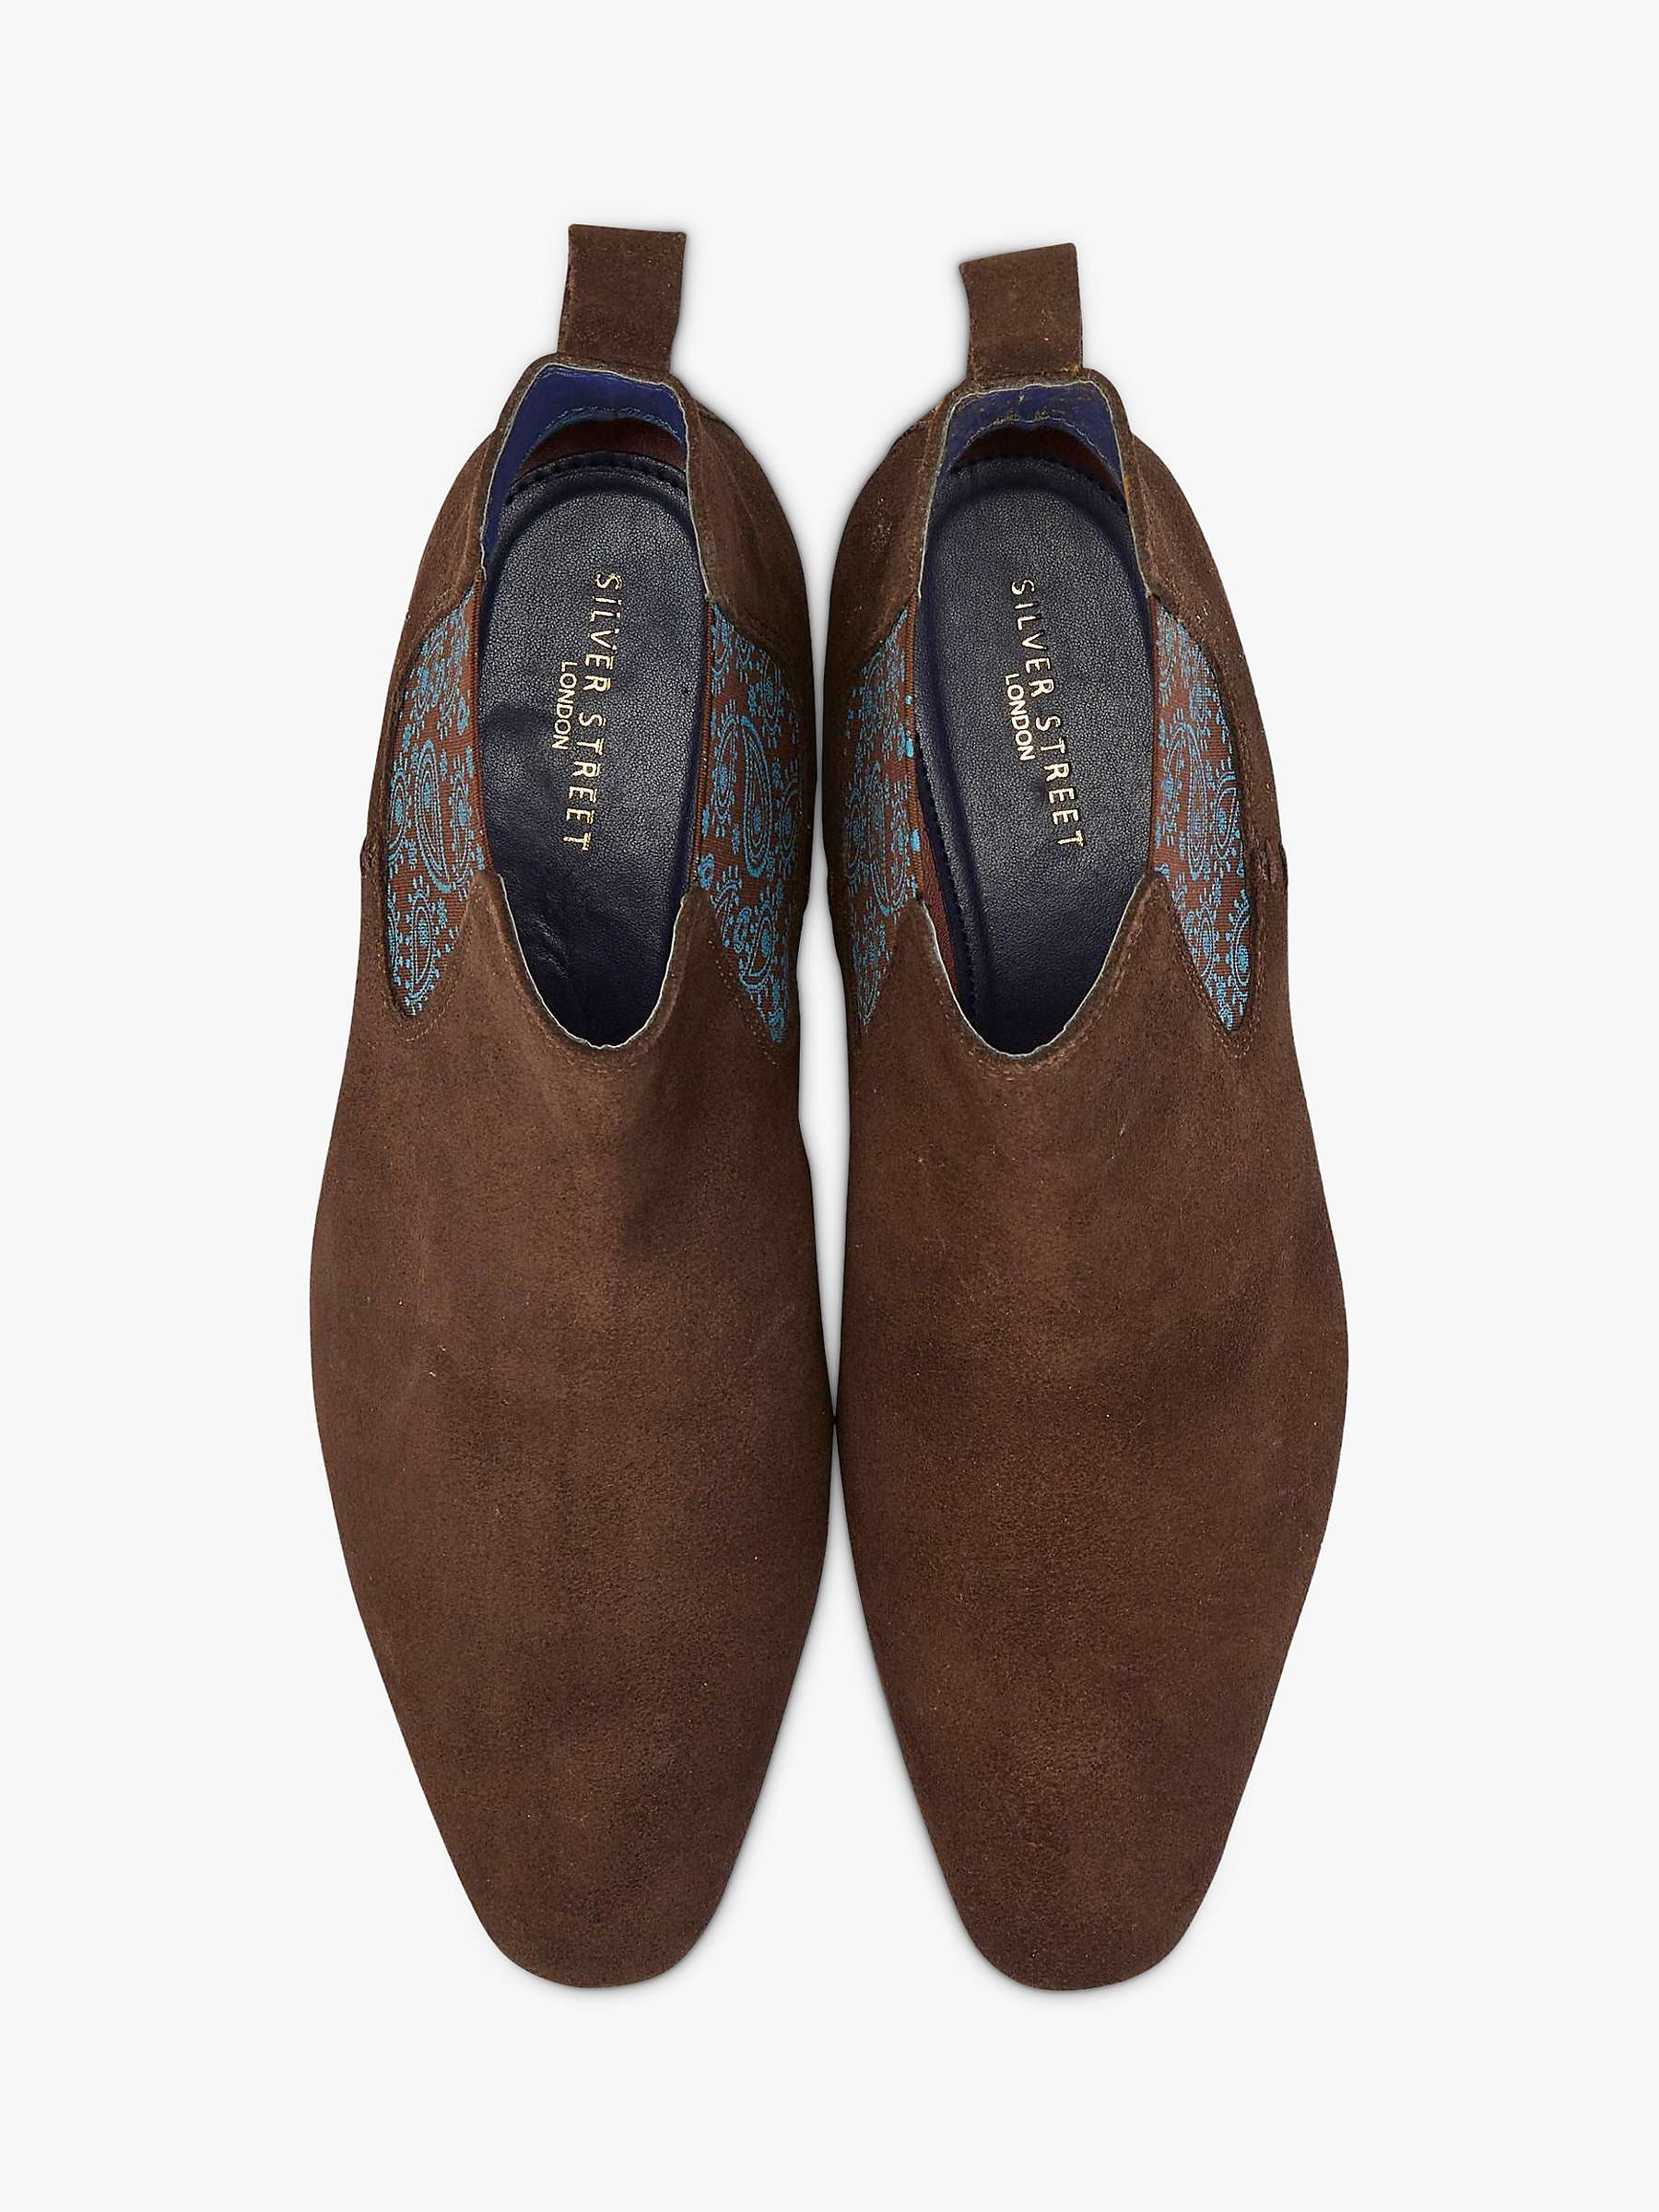 Buy Silver Street London Carnaby Suede Chelsea Boots, Brown Online at johnlewis.com